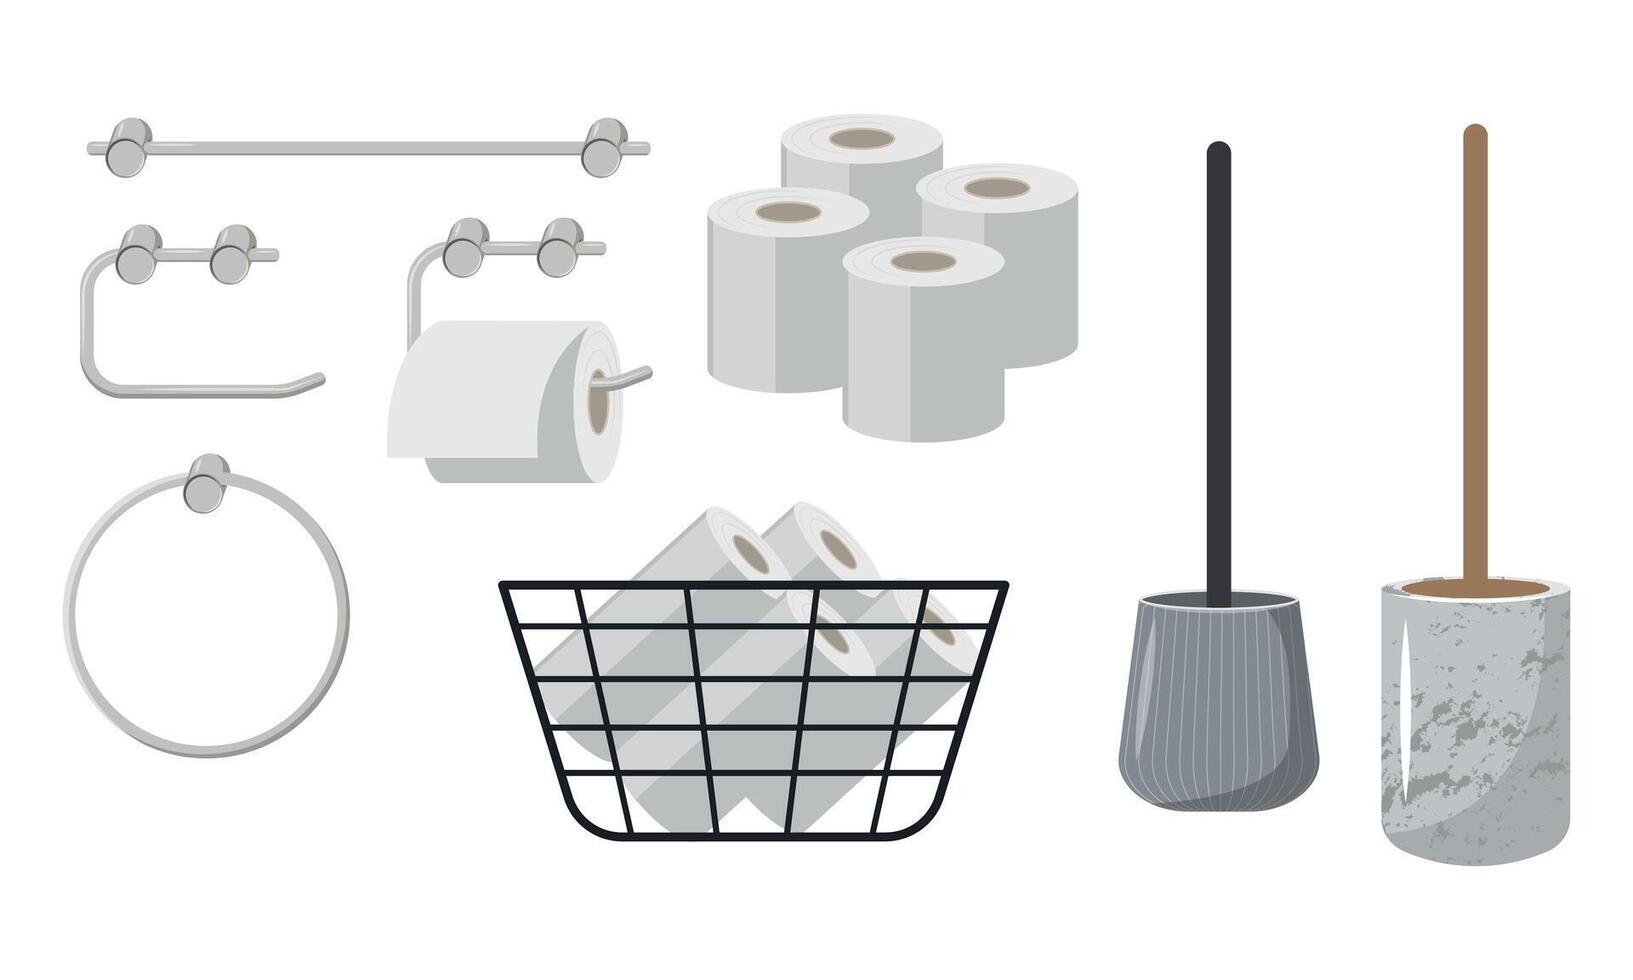 Toilet paper illustration set. Toilet paper in a flat style. Cleaning equipment set vector